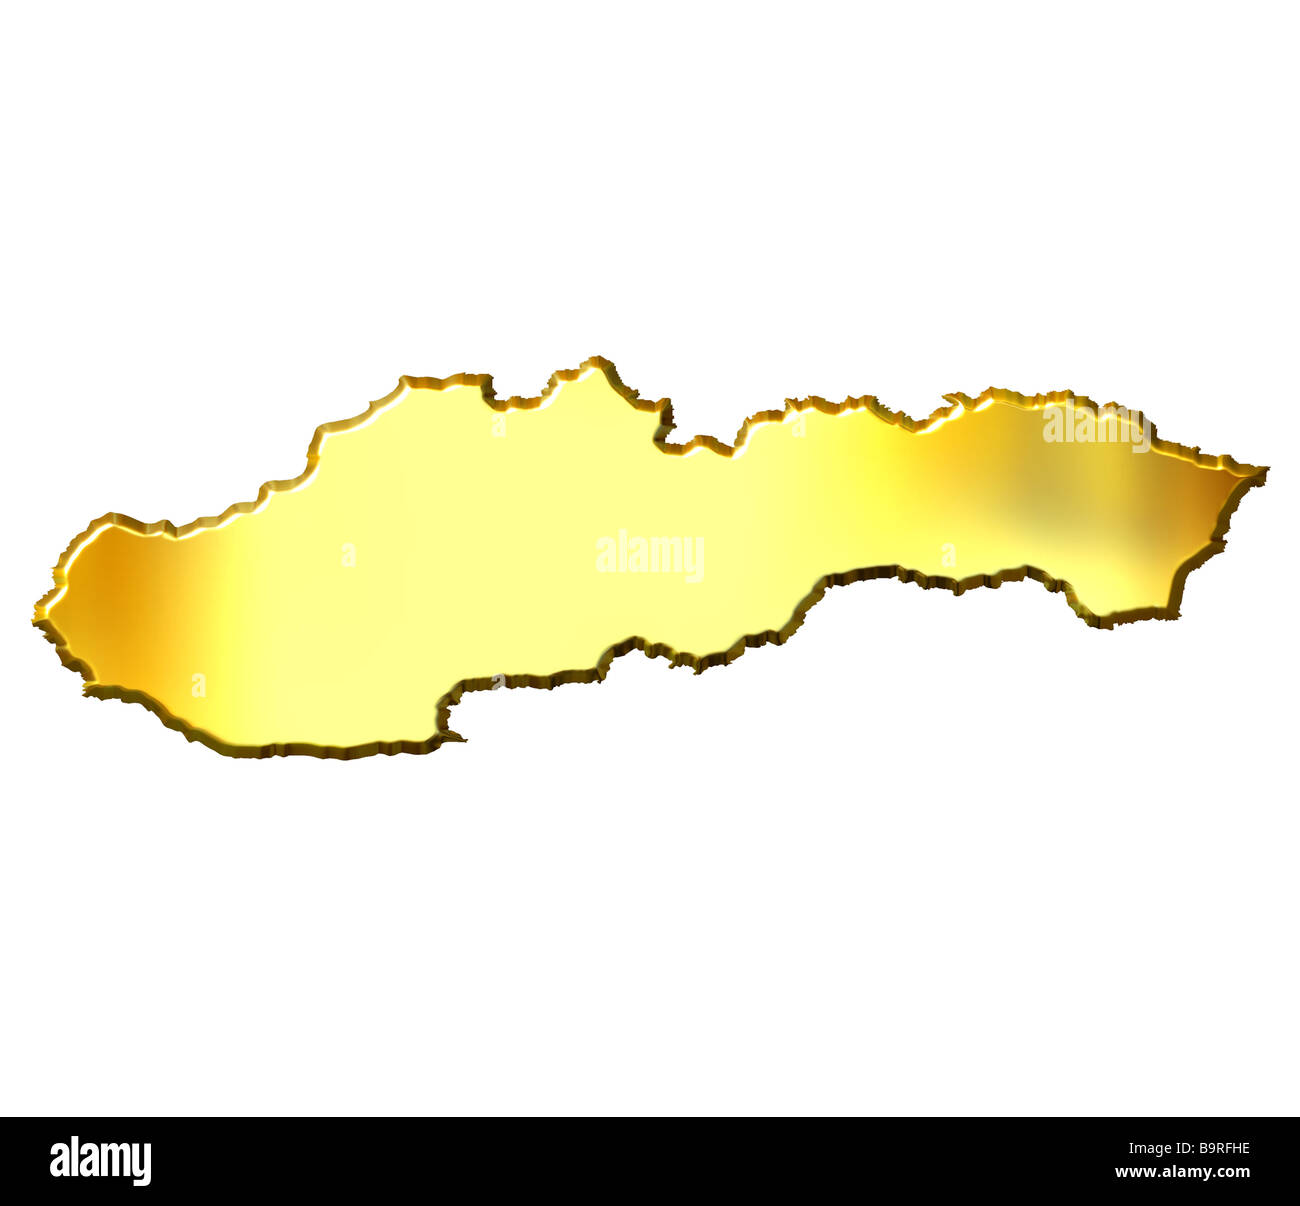 Slovakia 3d golden map isolated in white Stock Photo